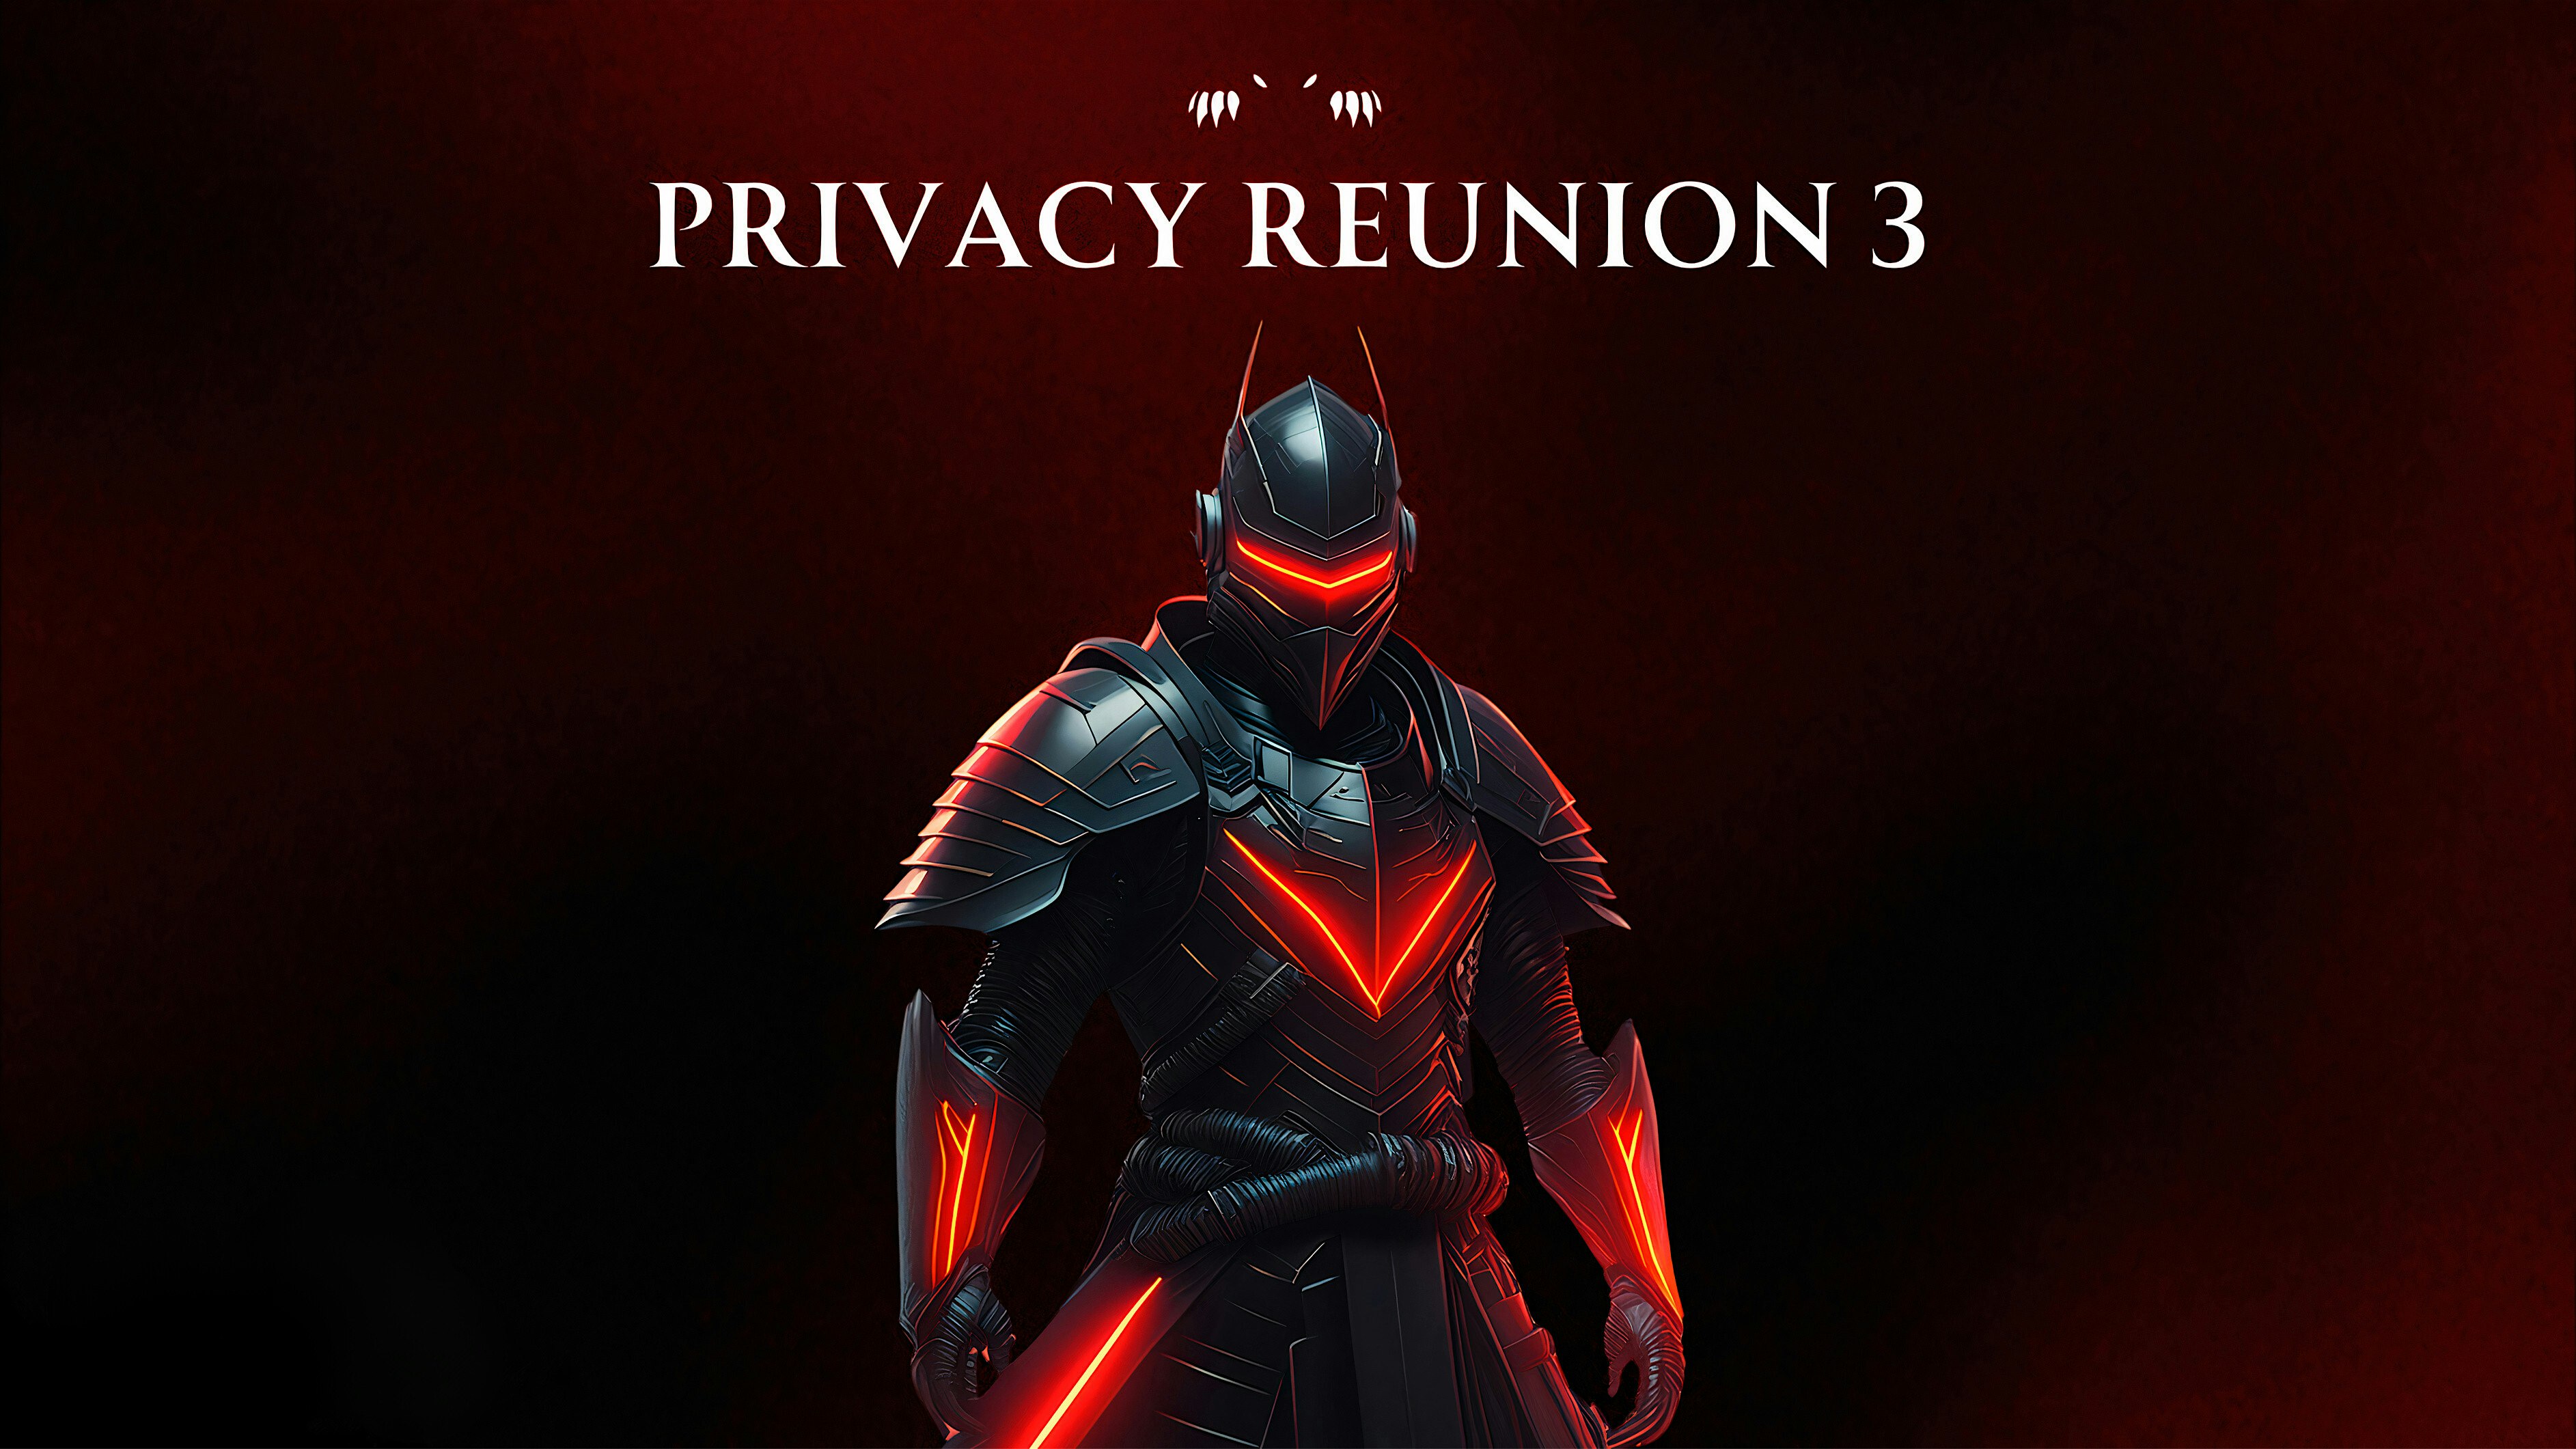 Privacy Reunion 3: A Premier Gathering for Privacy & Cryptography